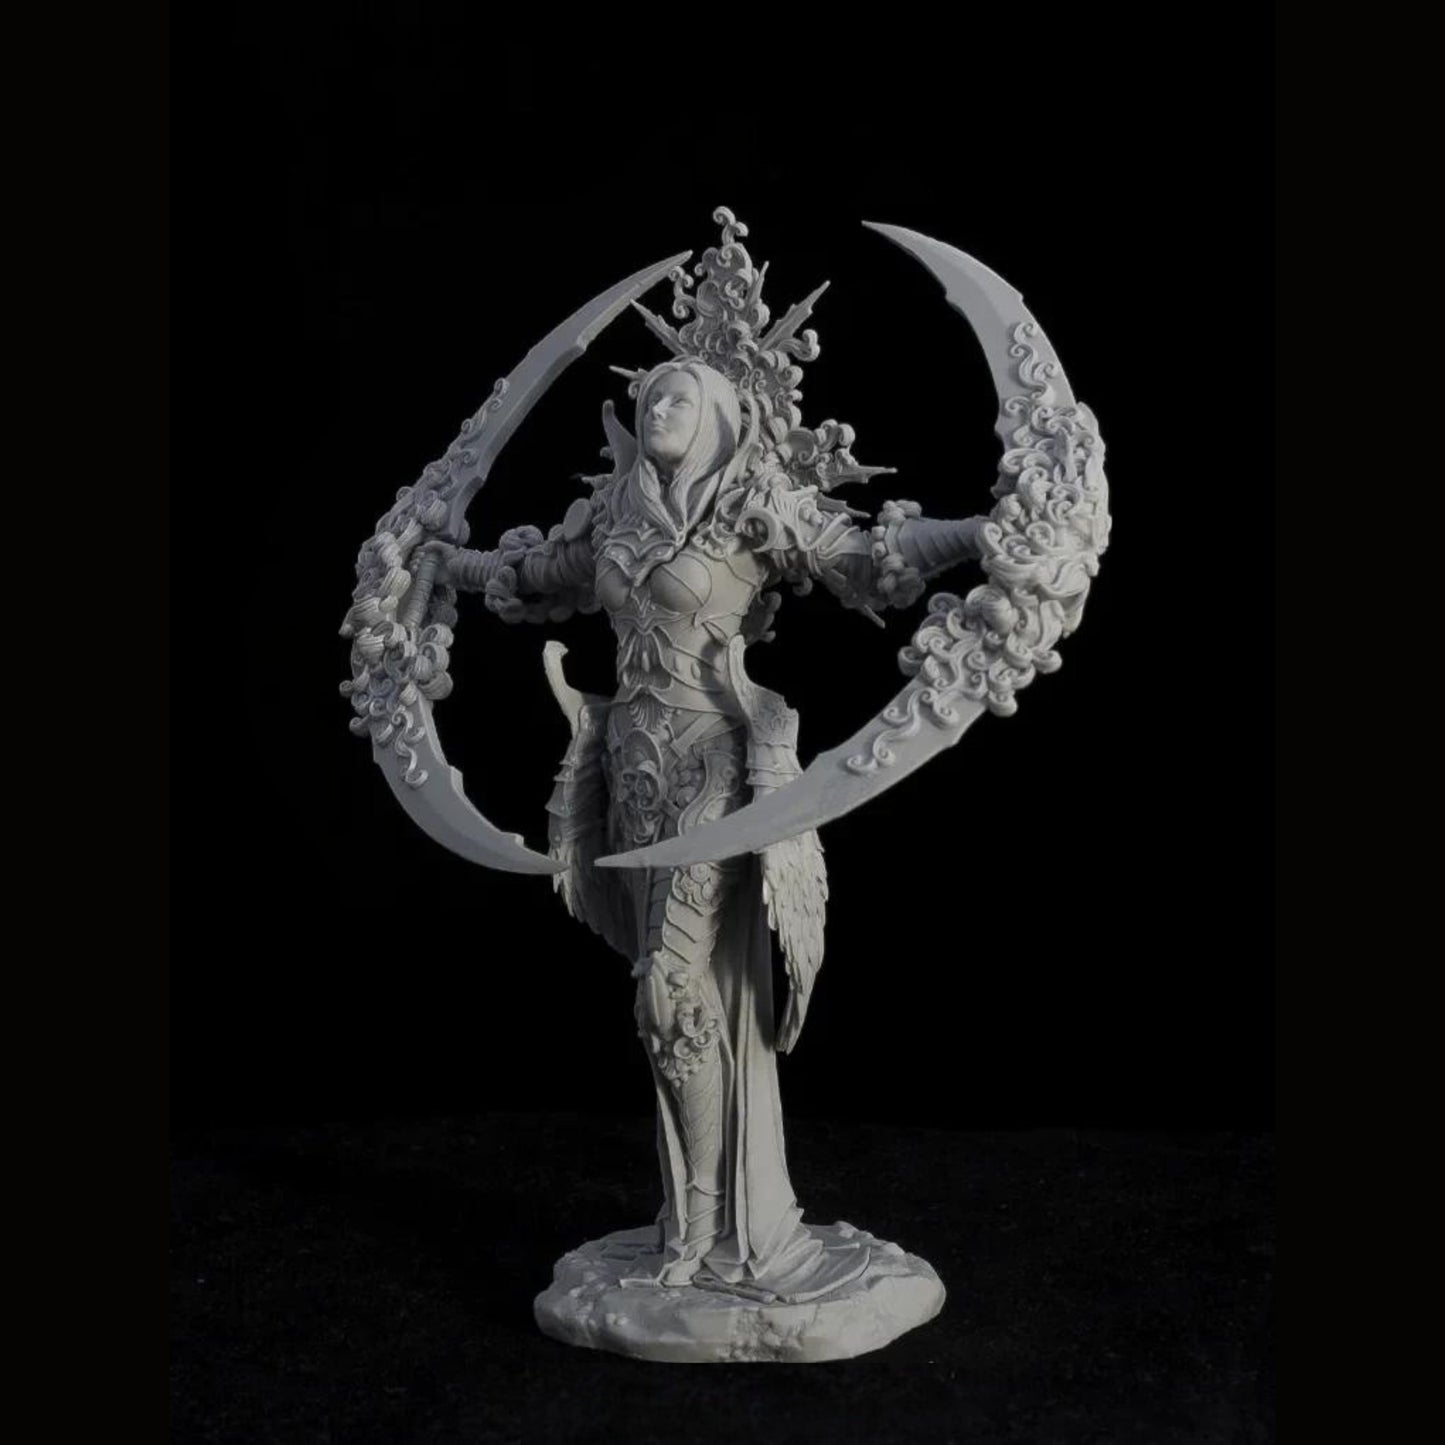 18+ Collector's 3D Printed Model: 1/18 ANCIENT SOLDIER woman fantasy stand   Resin figure Model kits Miniature soldier Unassembled Unpainted